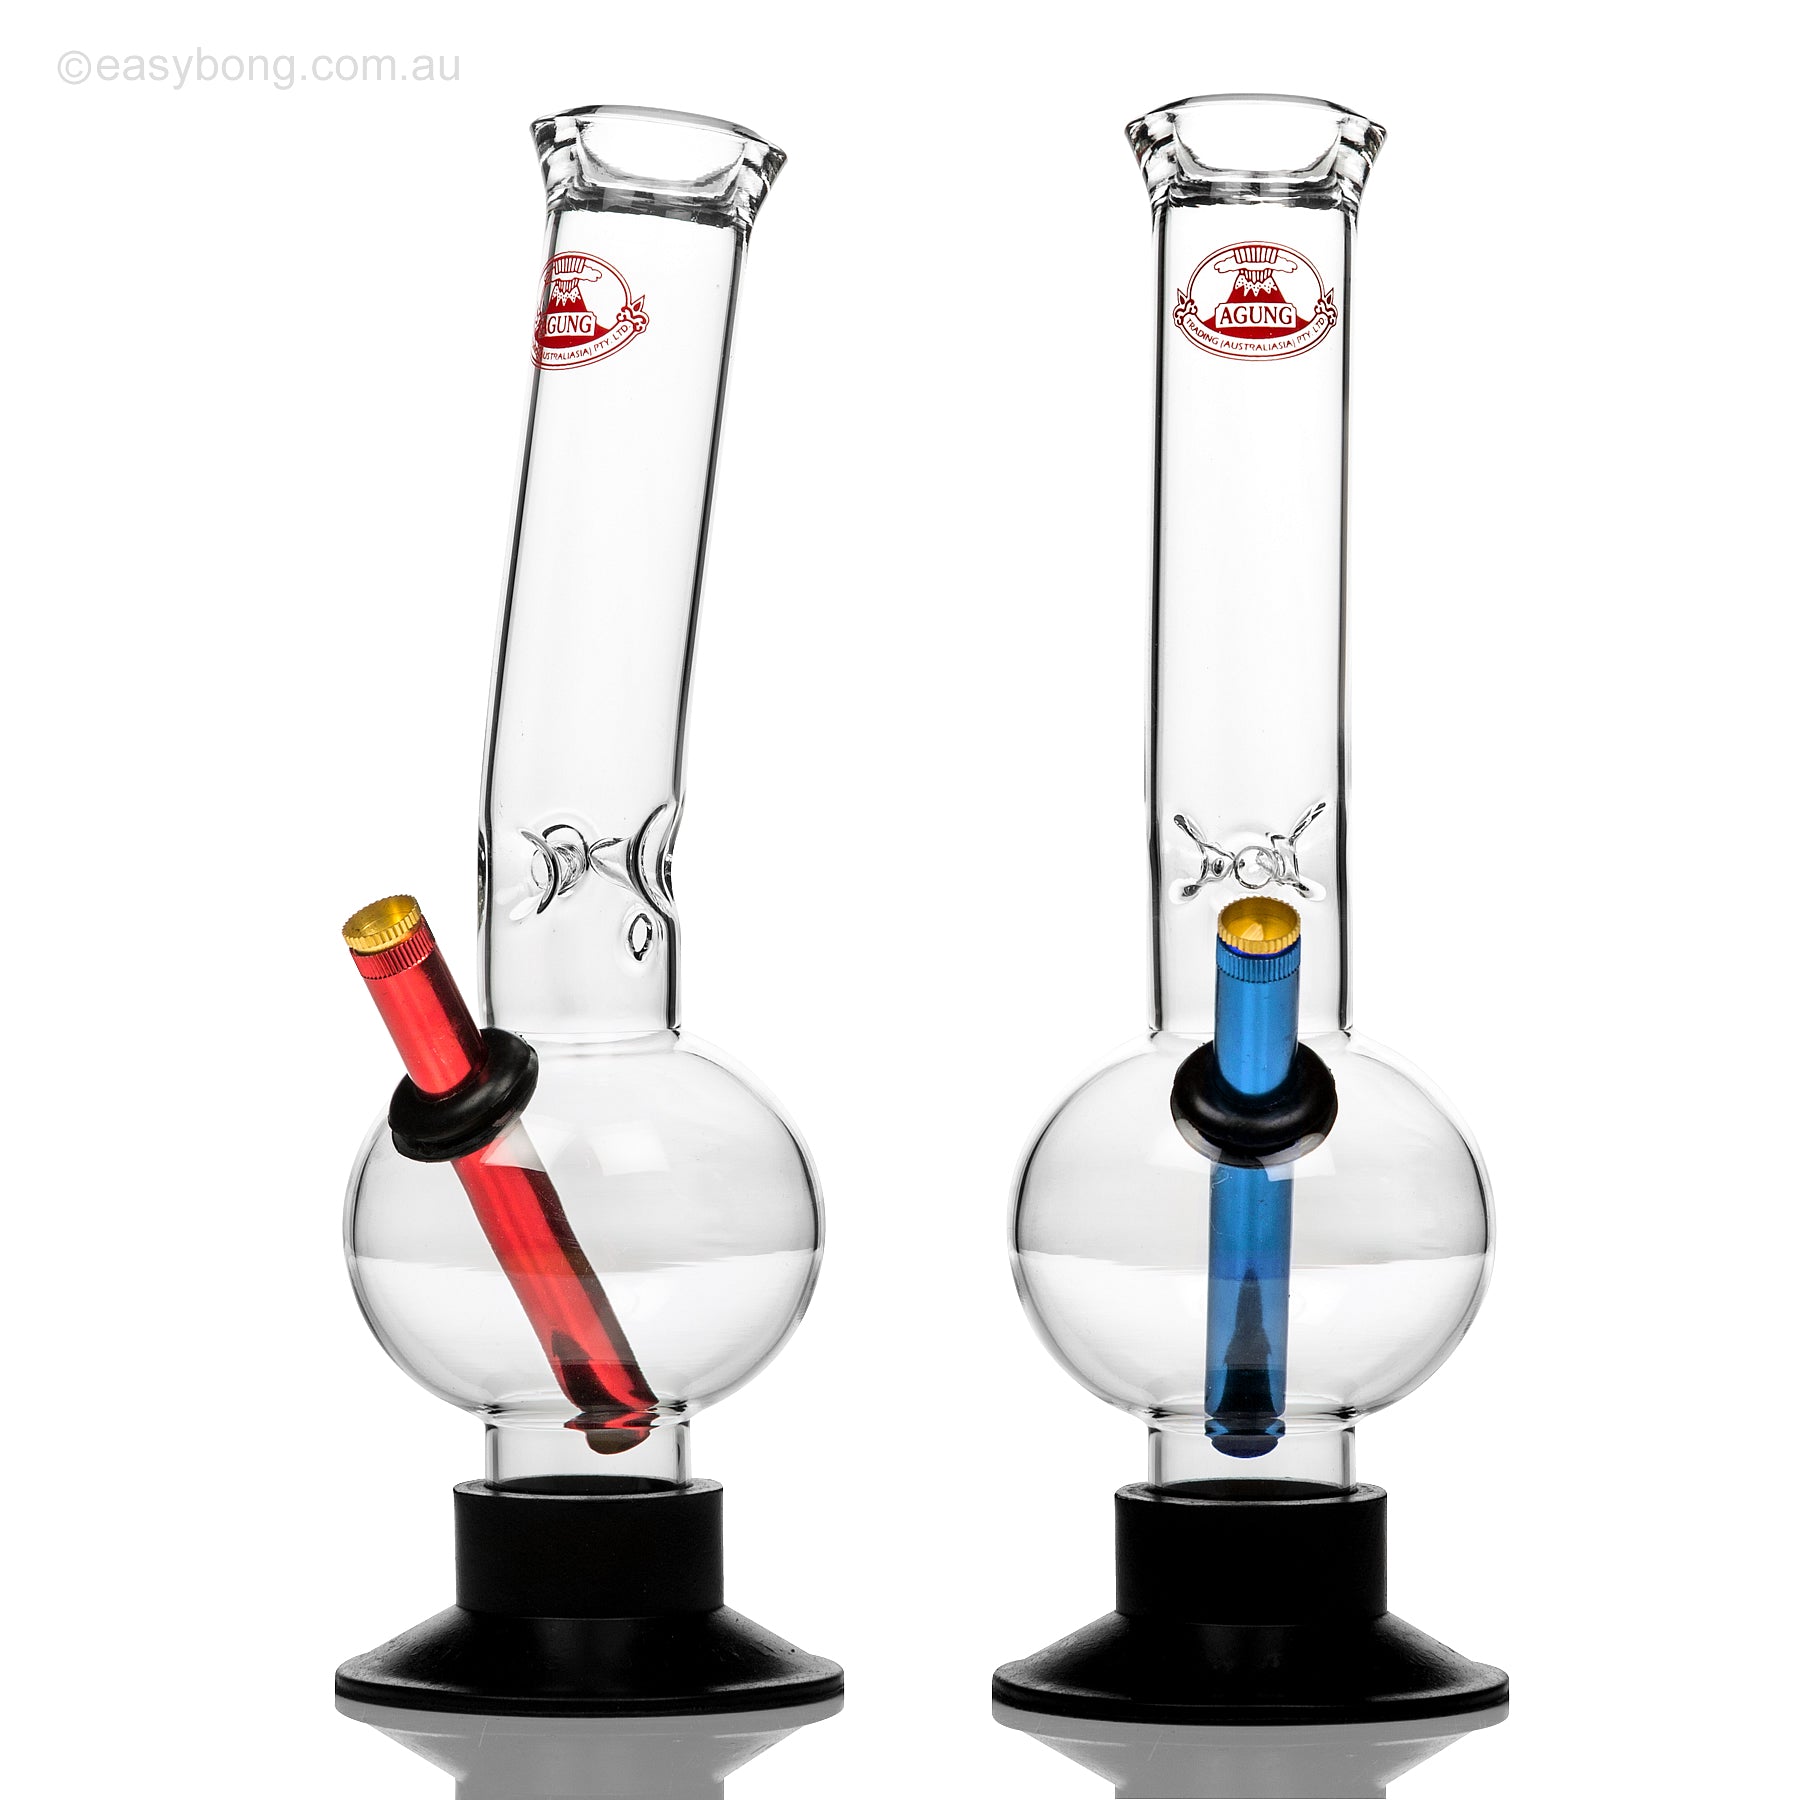 Glass bong designed for Aussie stoners with metal stem and brass cone piece.